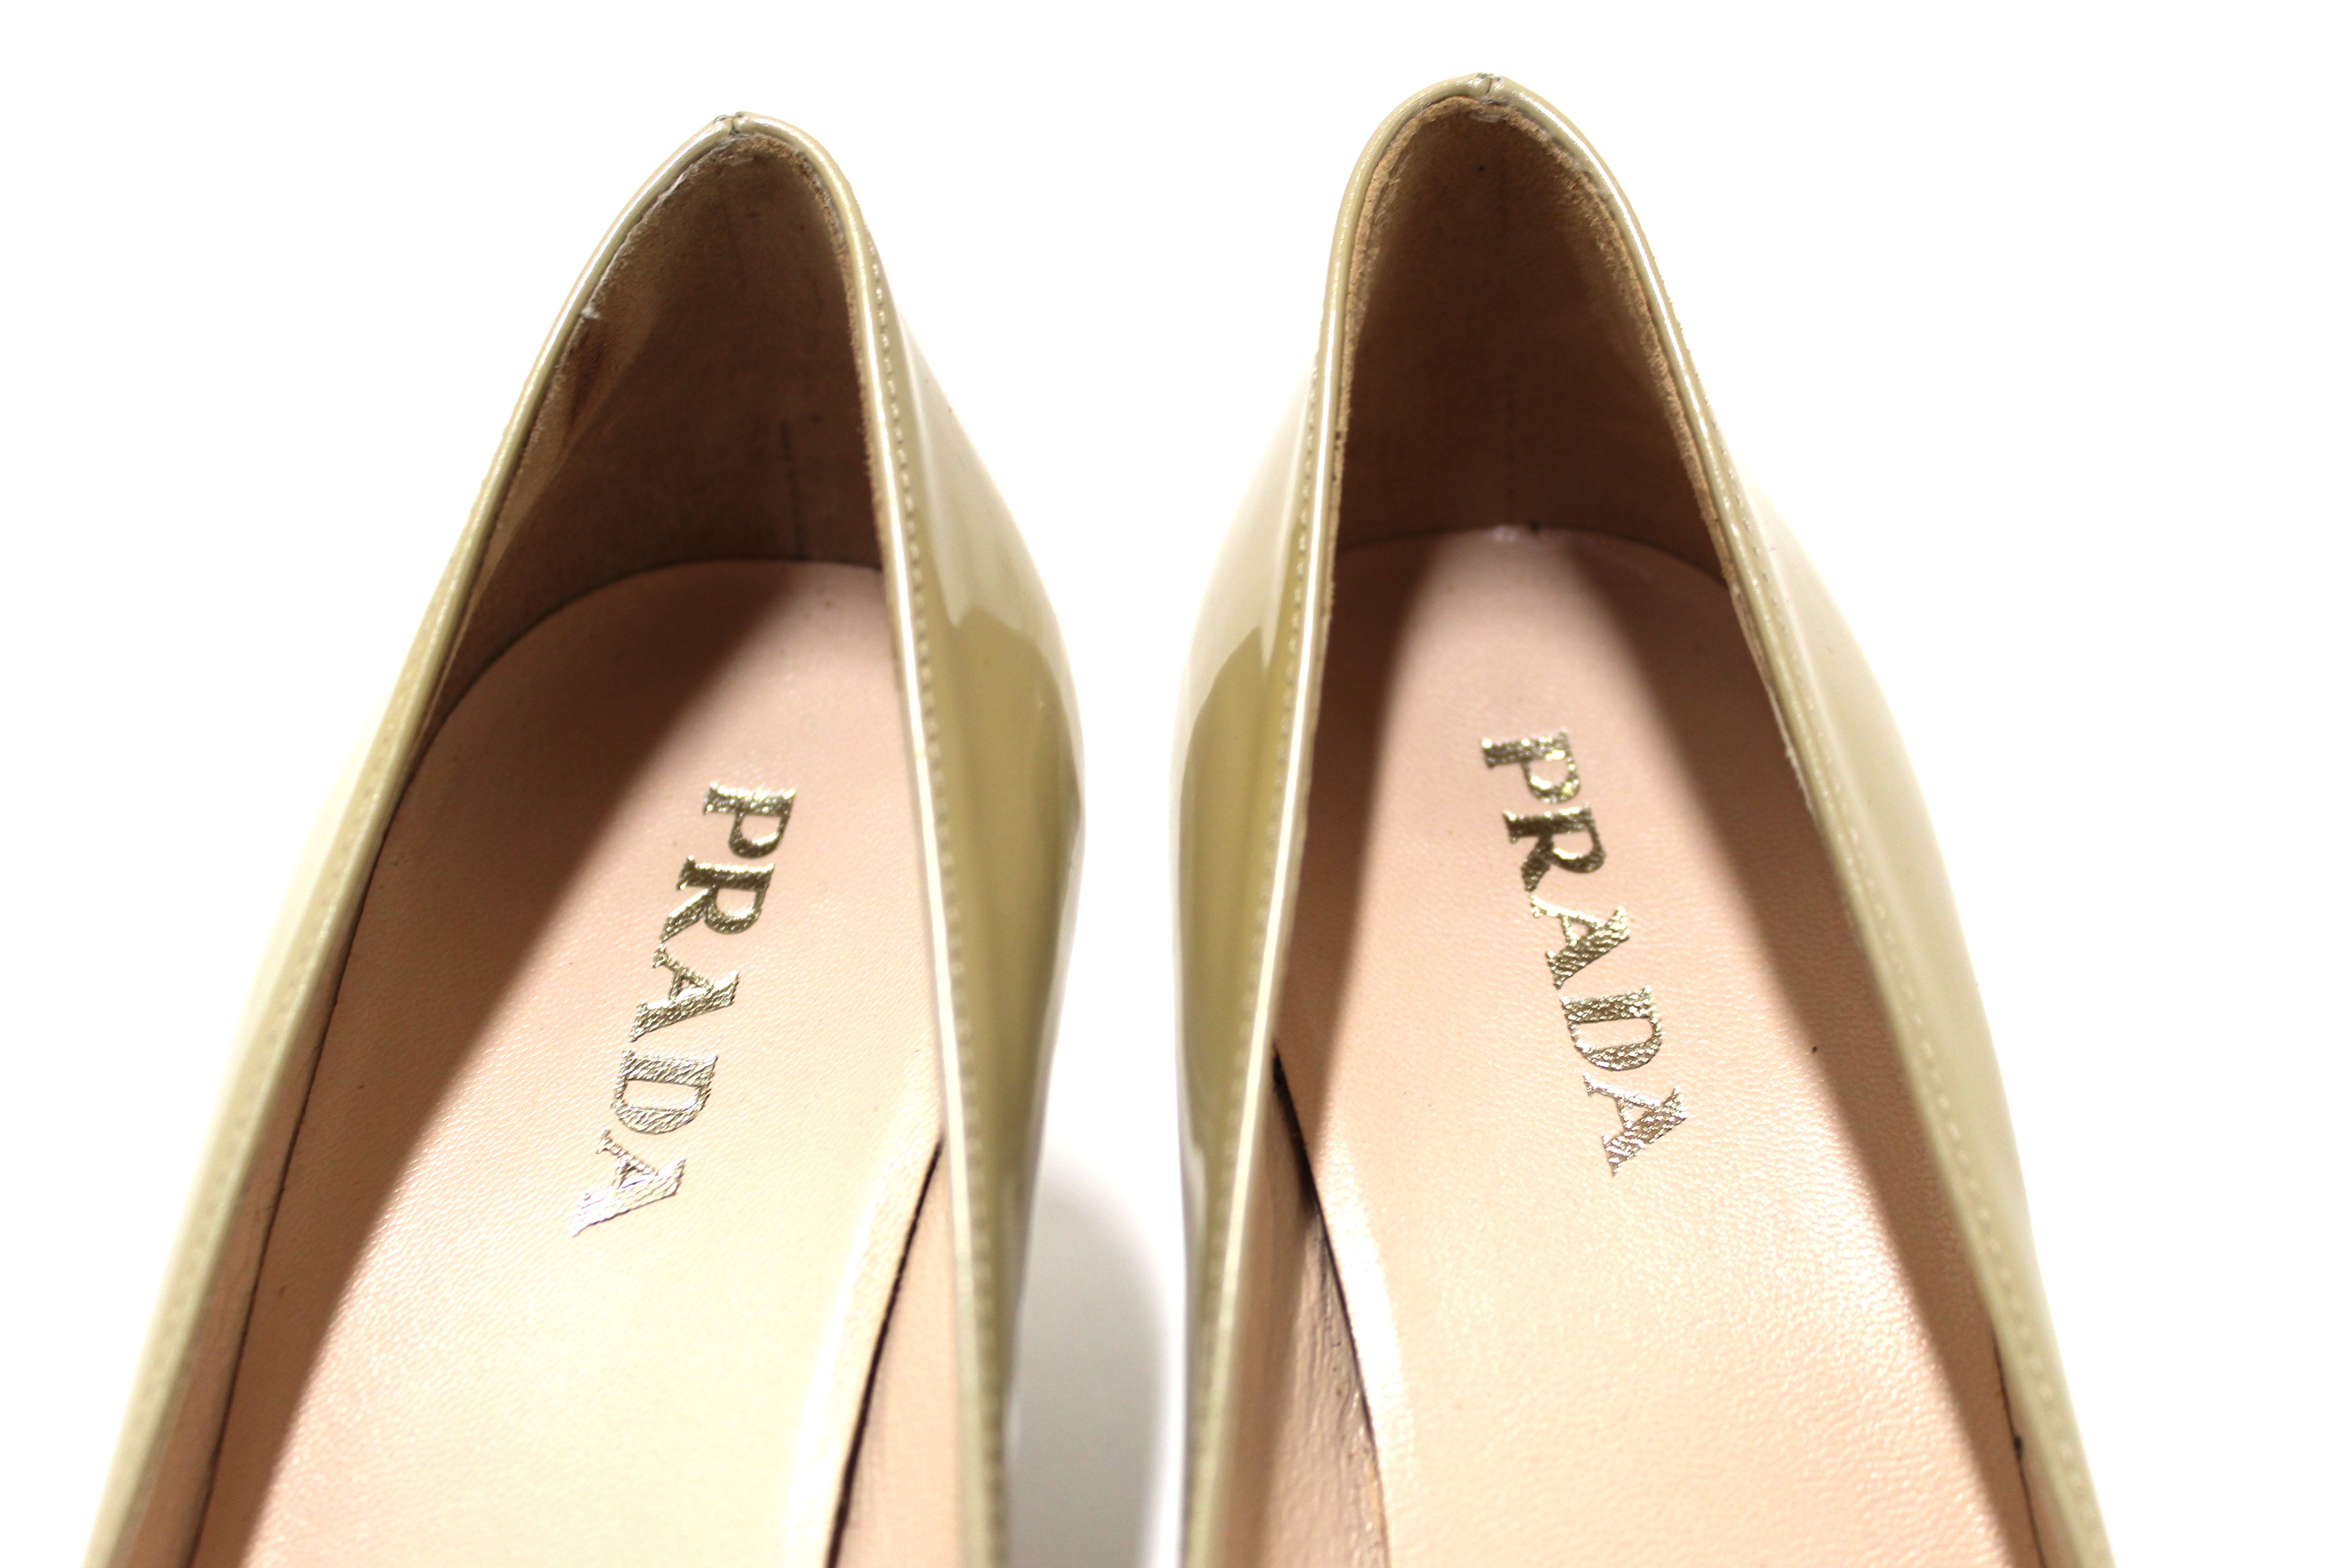 Authentic Prada Calzature Donna Shimmer Beige Bow Patent Leather Kitten Heel Shoes Size 37